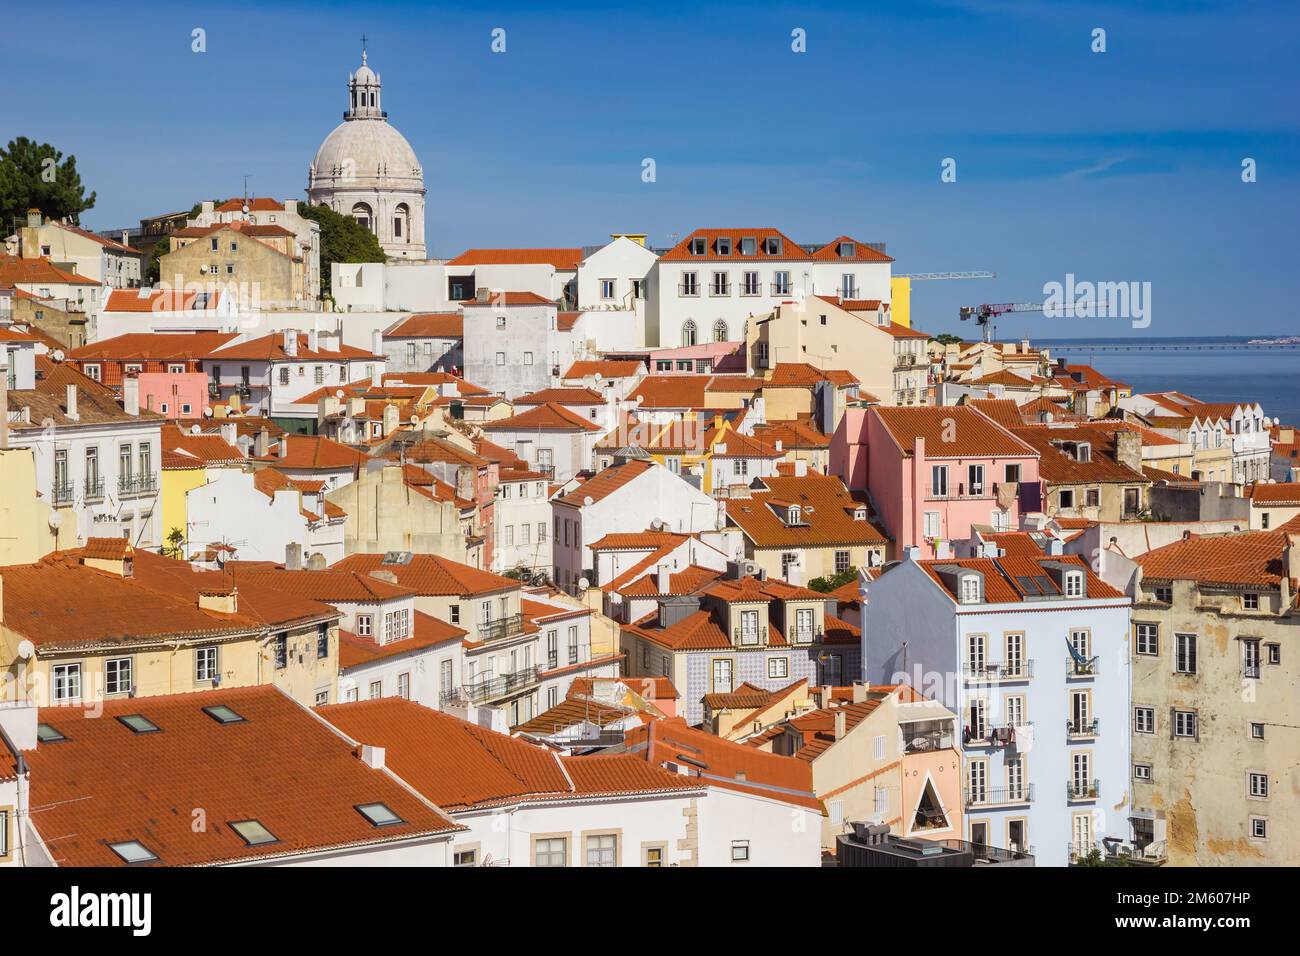 Colorful houses and the dome of the Santa Engracia church in Lisbon, Portugal Stock Photo